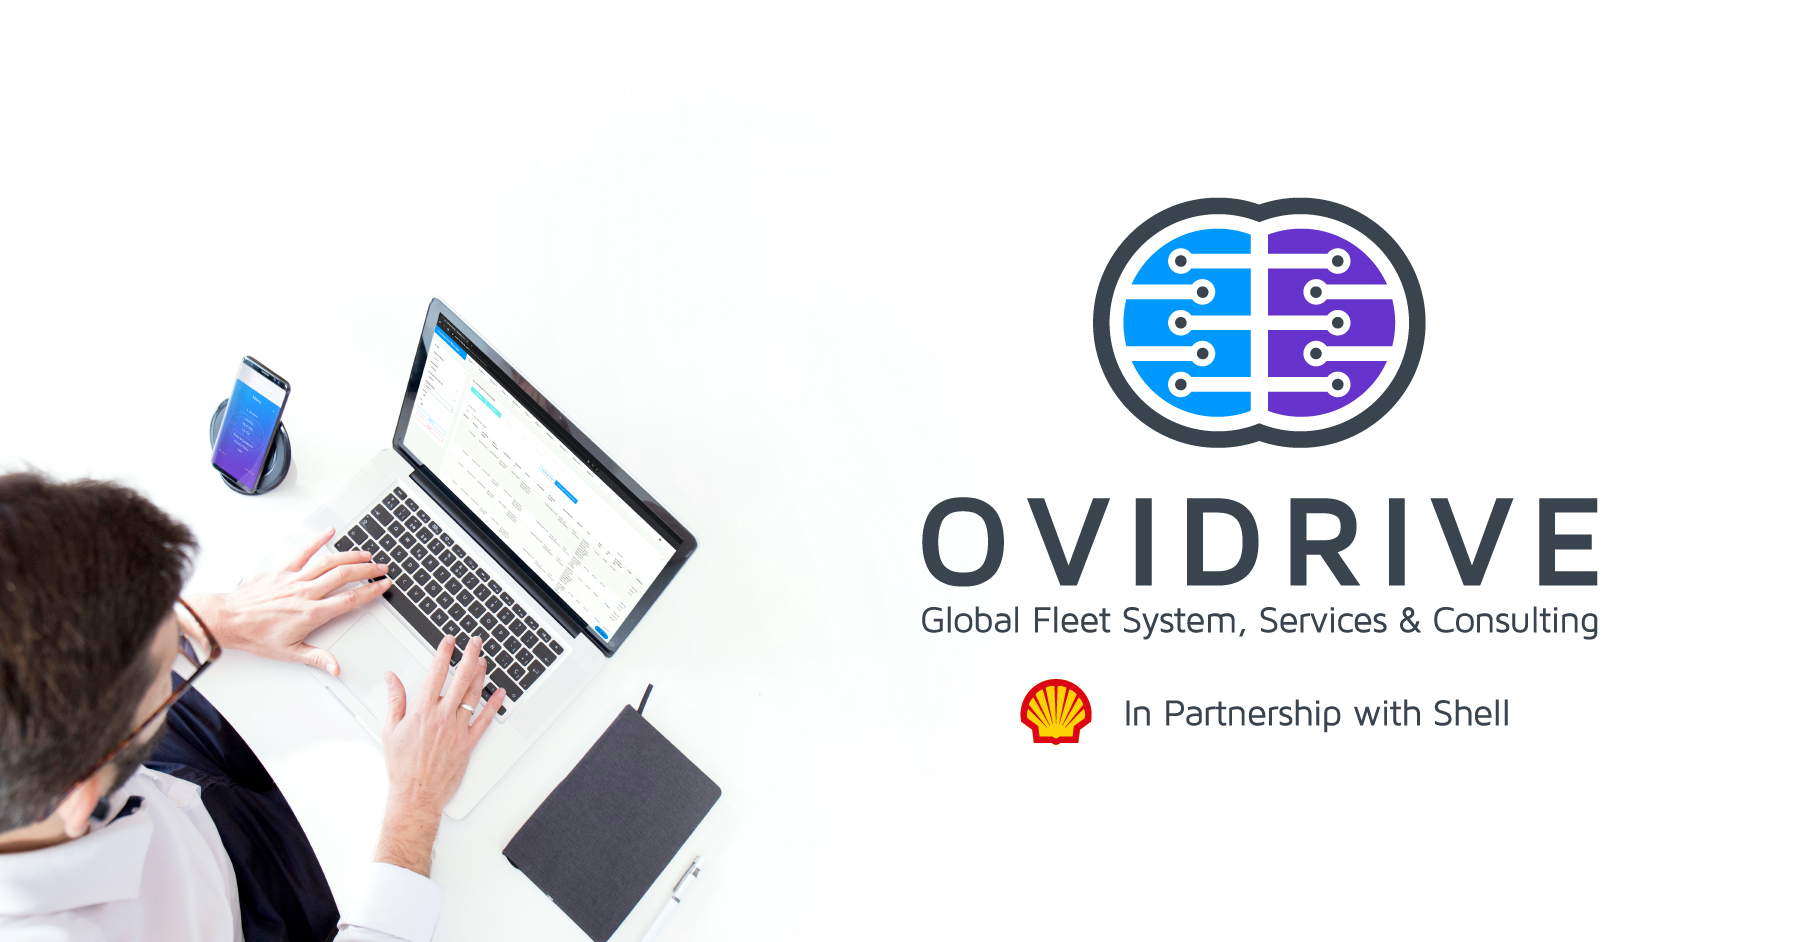 Shell invests in OviDrive to enhance the digitisation of corporate fleets